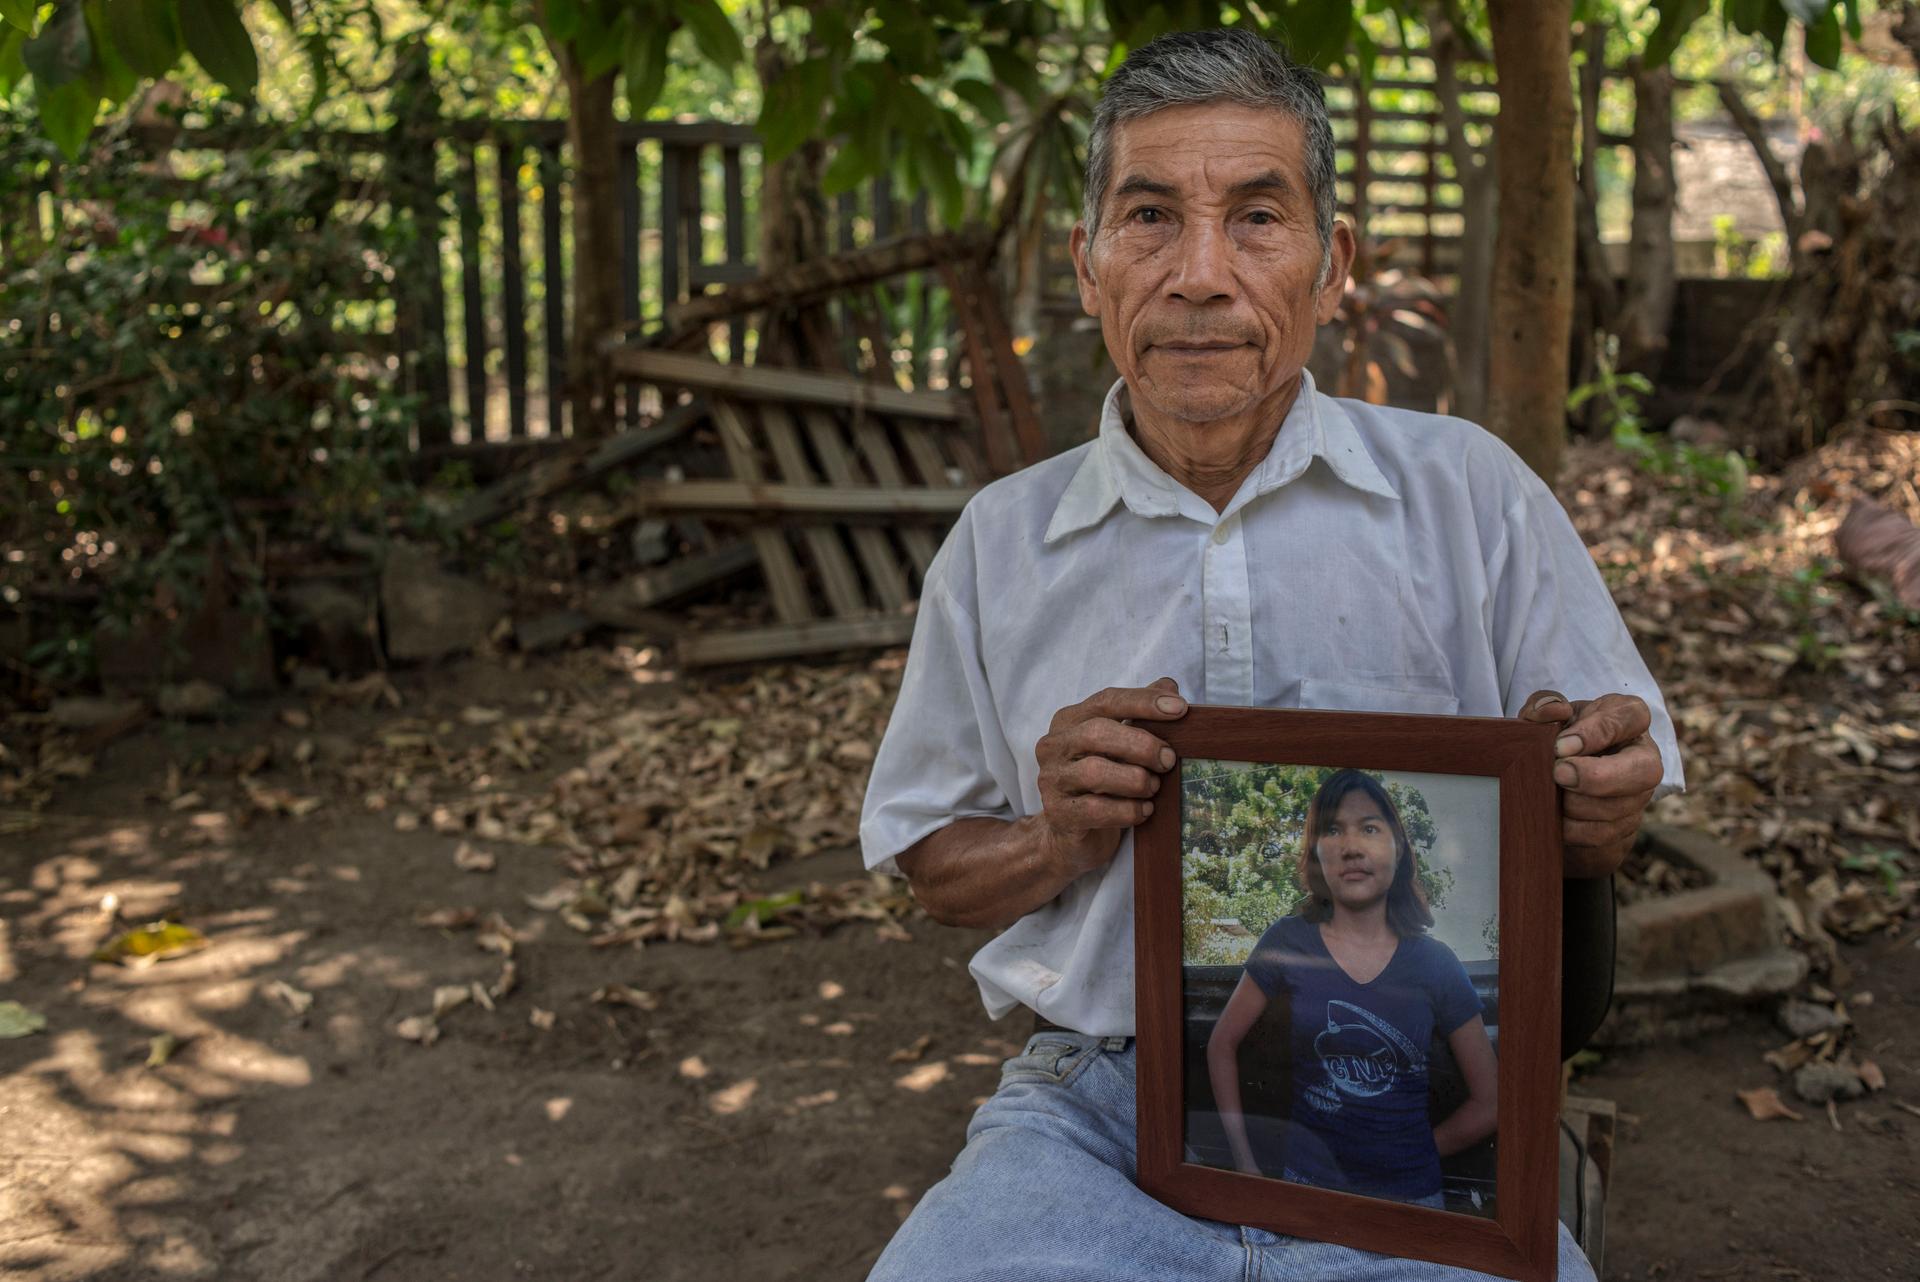 Rene Colocho with an image of his daughter, Angela, who committed suicide after struggling with severe lead poisoning for years. Colocho blames her sickness on pollution from a company which escaped punishment after appealing to the ISDS.